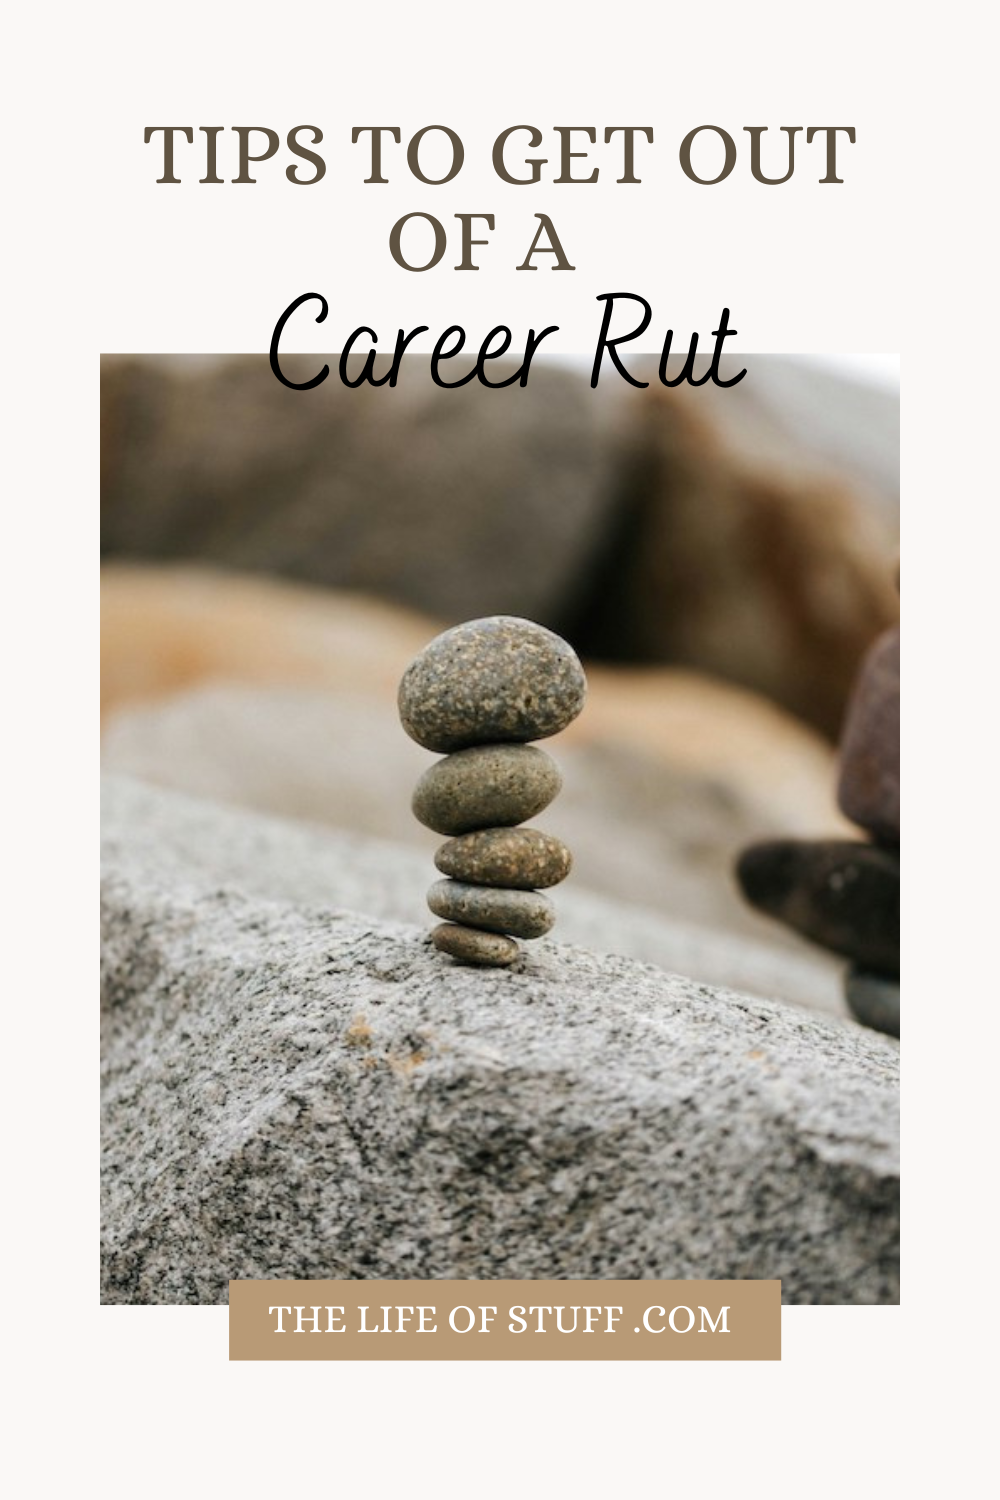 Tips to Get Out Of A Career Rut - The Life of Stuff